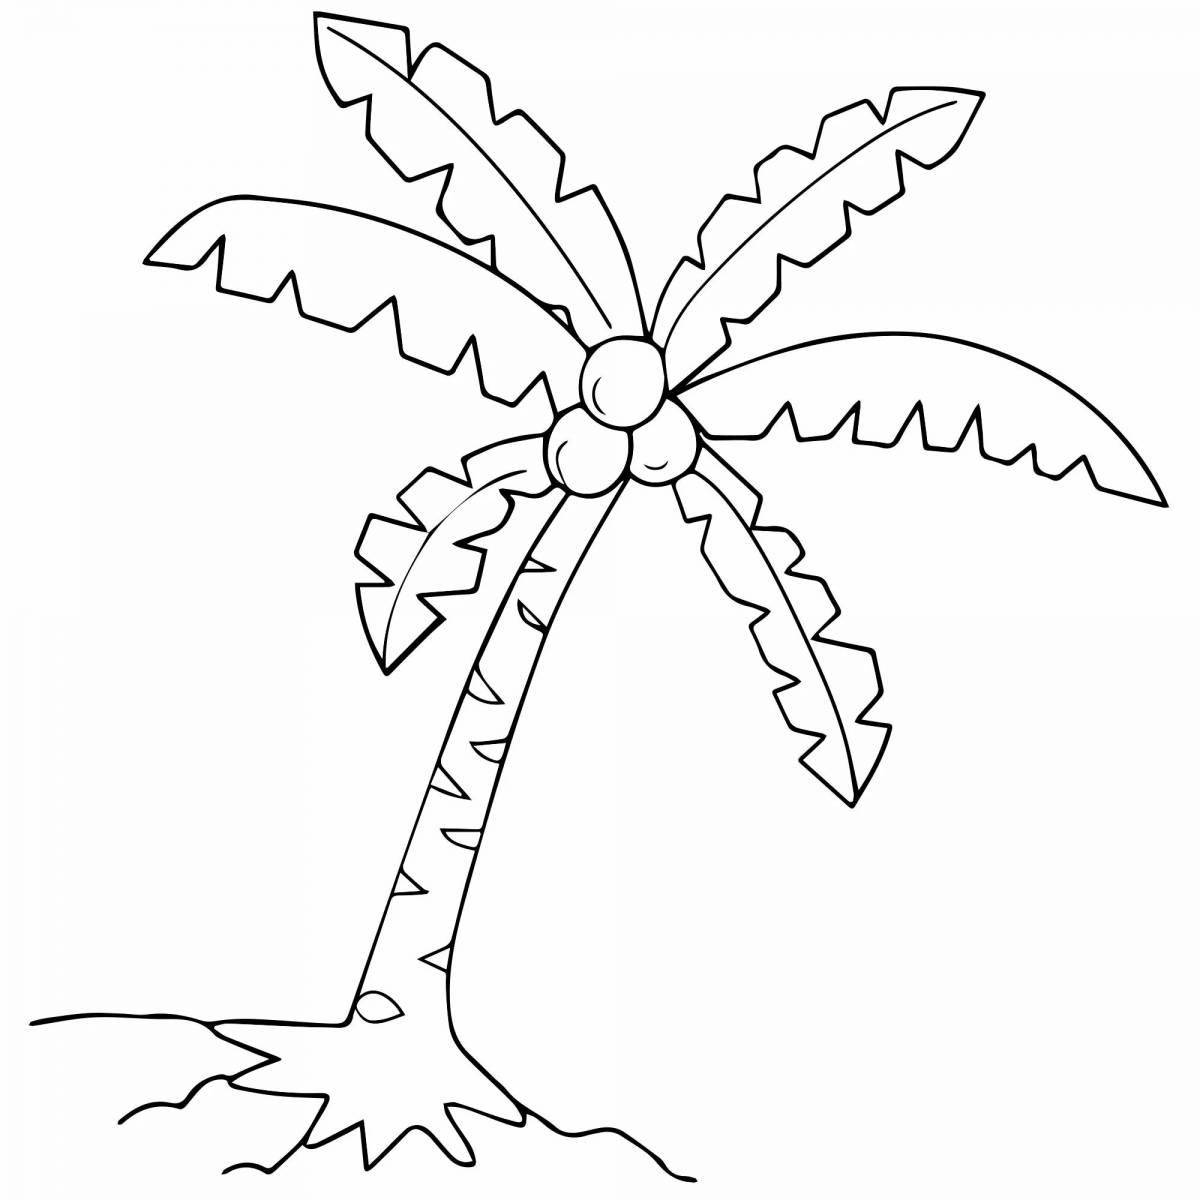 Coloring sweet palm tree for kids